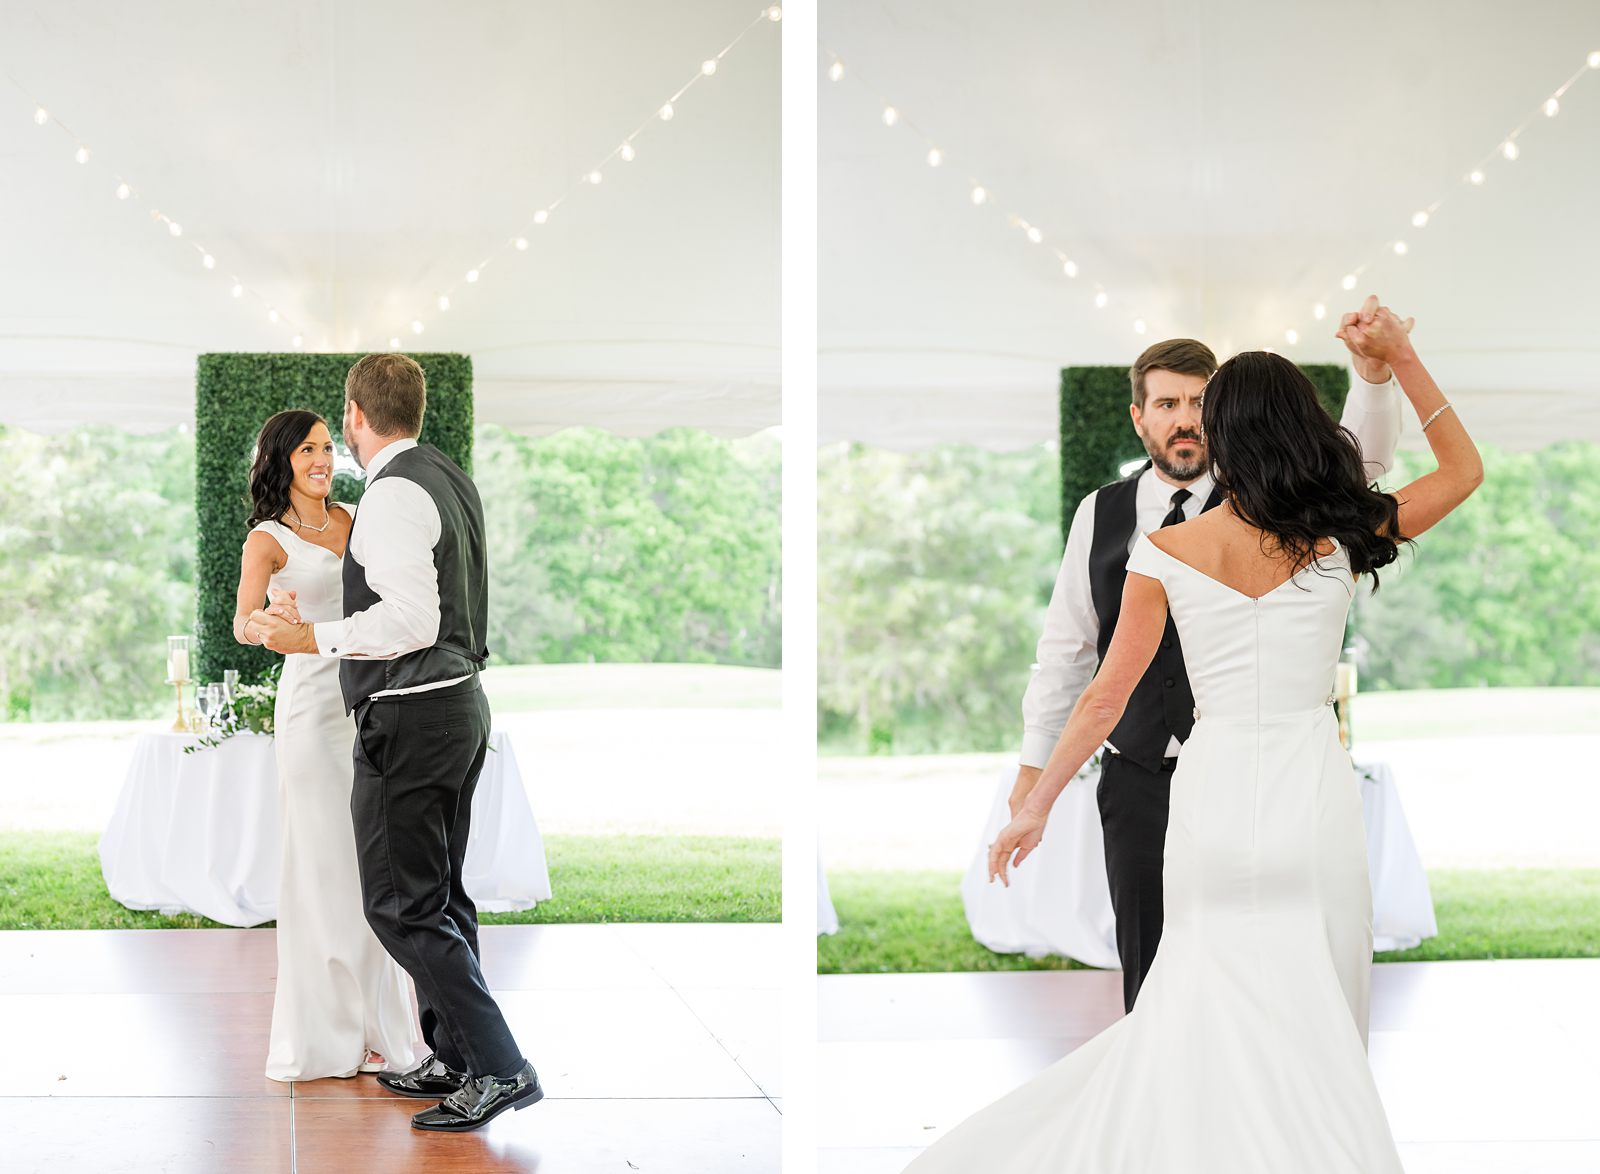 Bride and groom first dance at spring wedding reception by virginia wedding photographer 